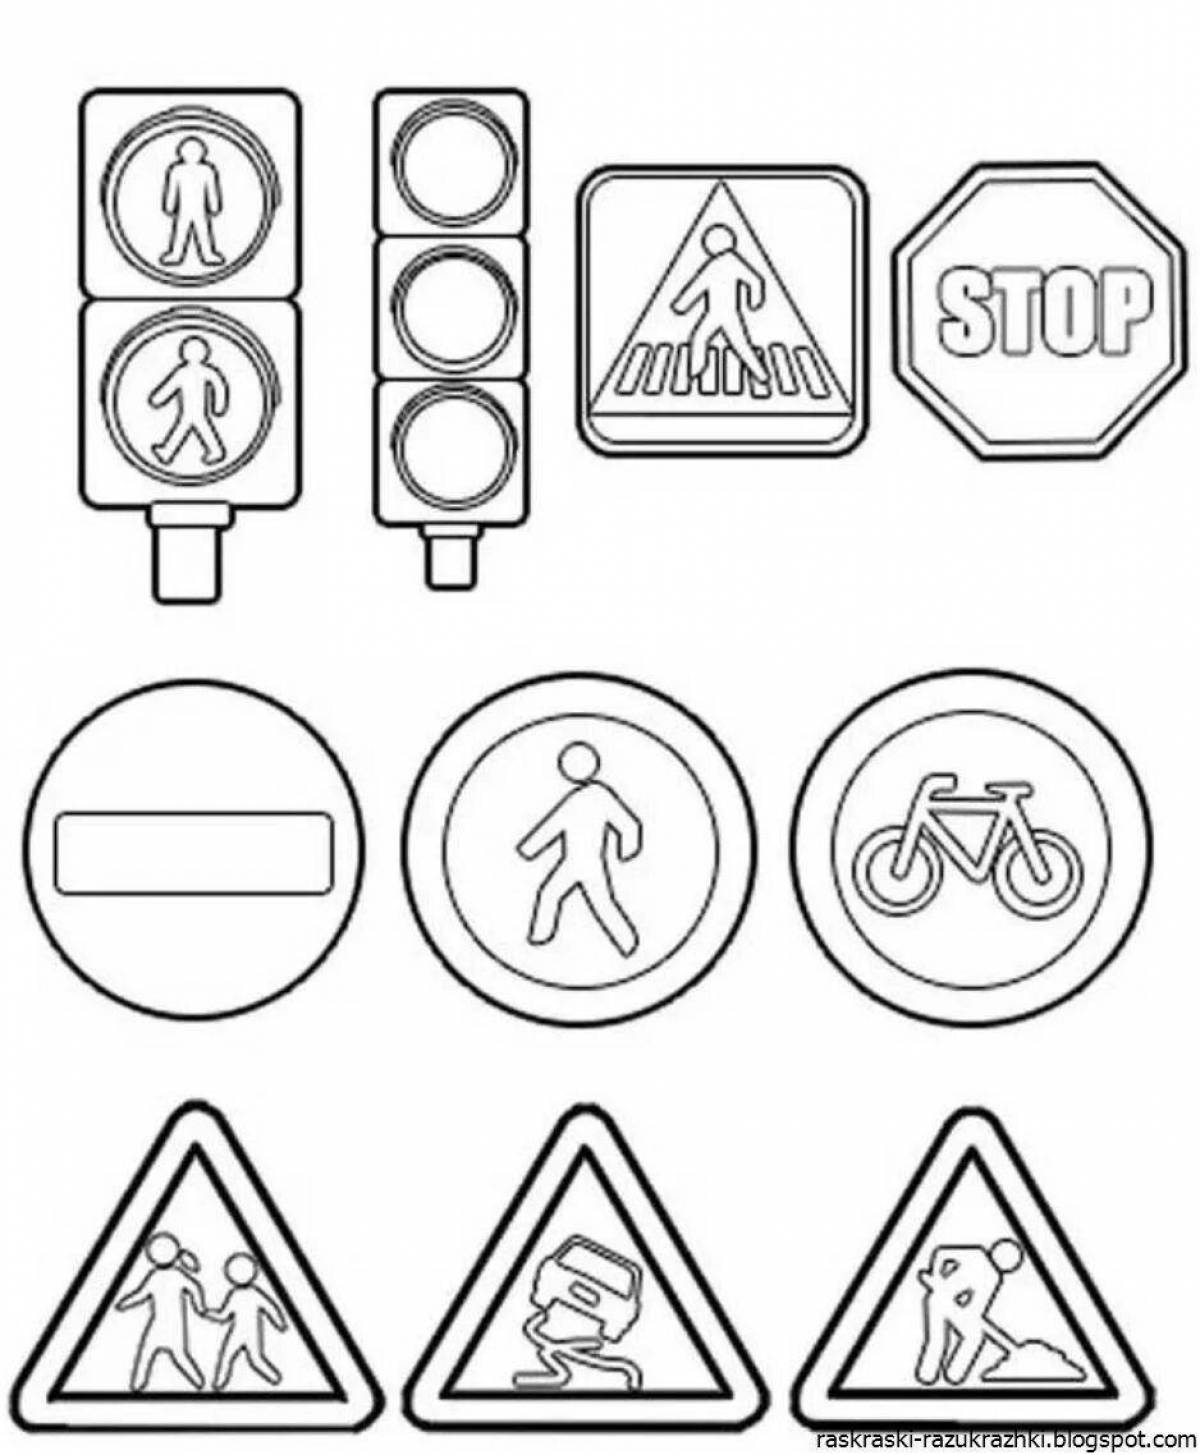 Creative road signs coloring page with names